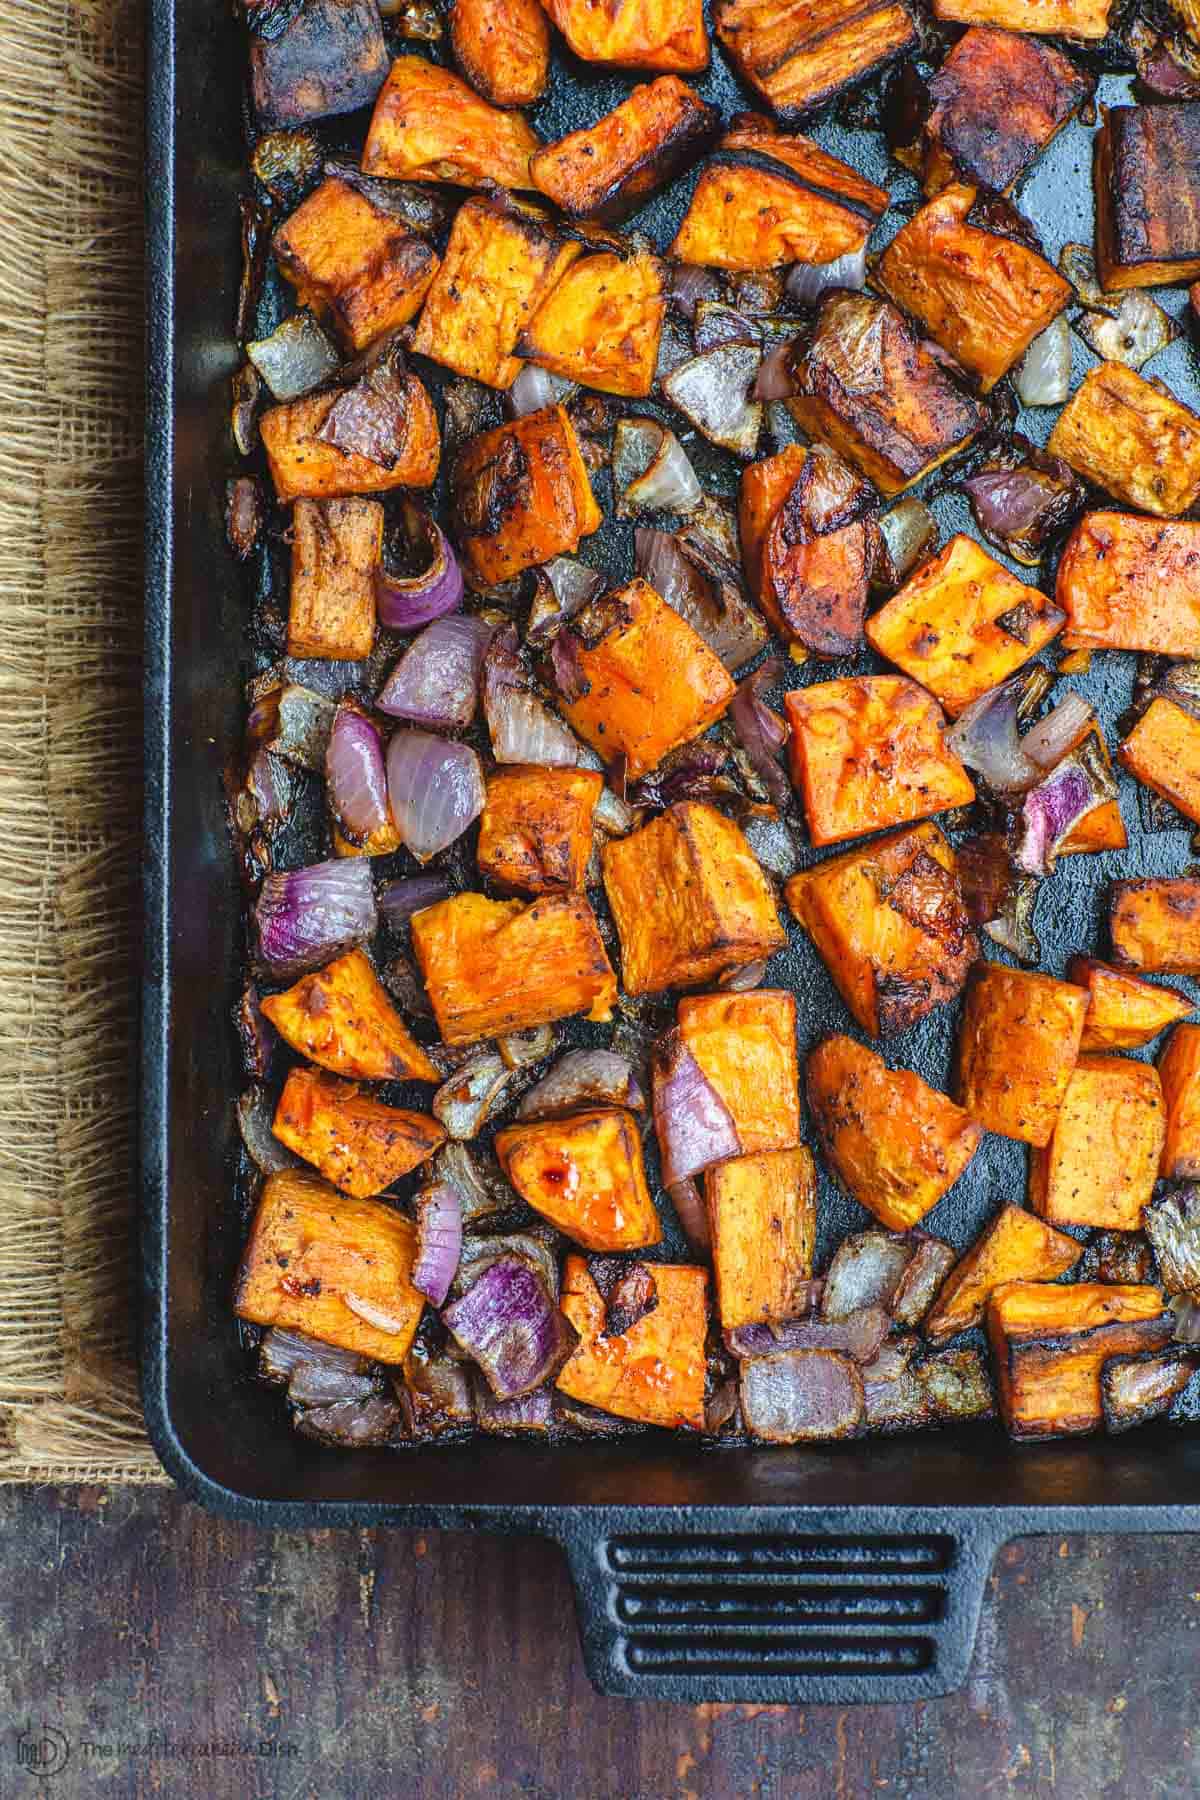 Diced sweet potatoes and onions roasted in cast iron pan